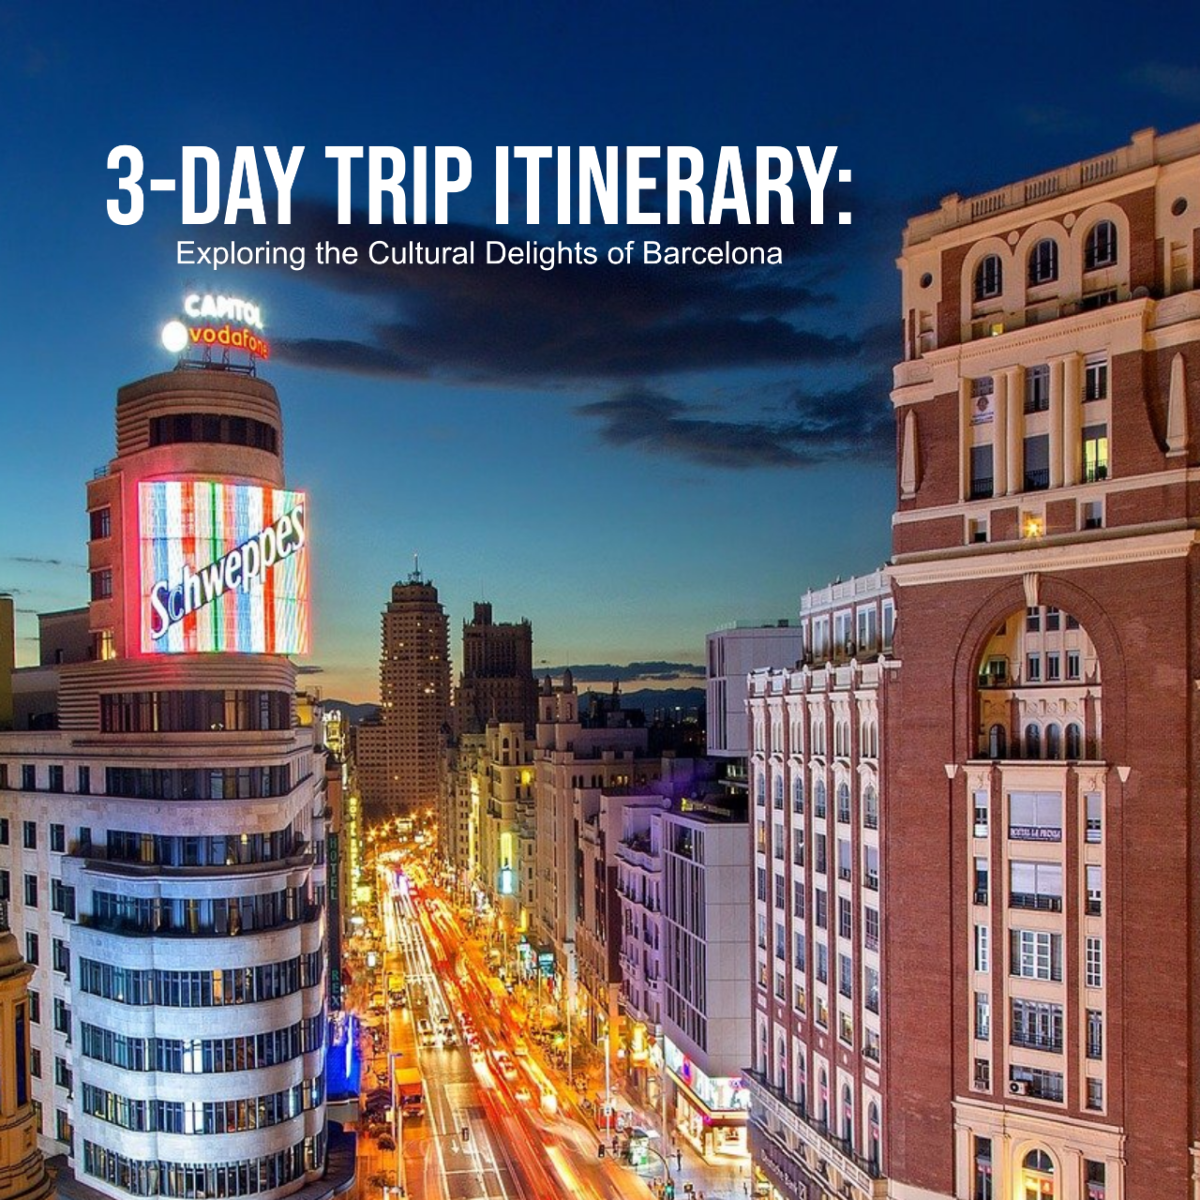 3 Day Trip Itinerary Template